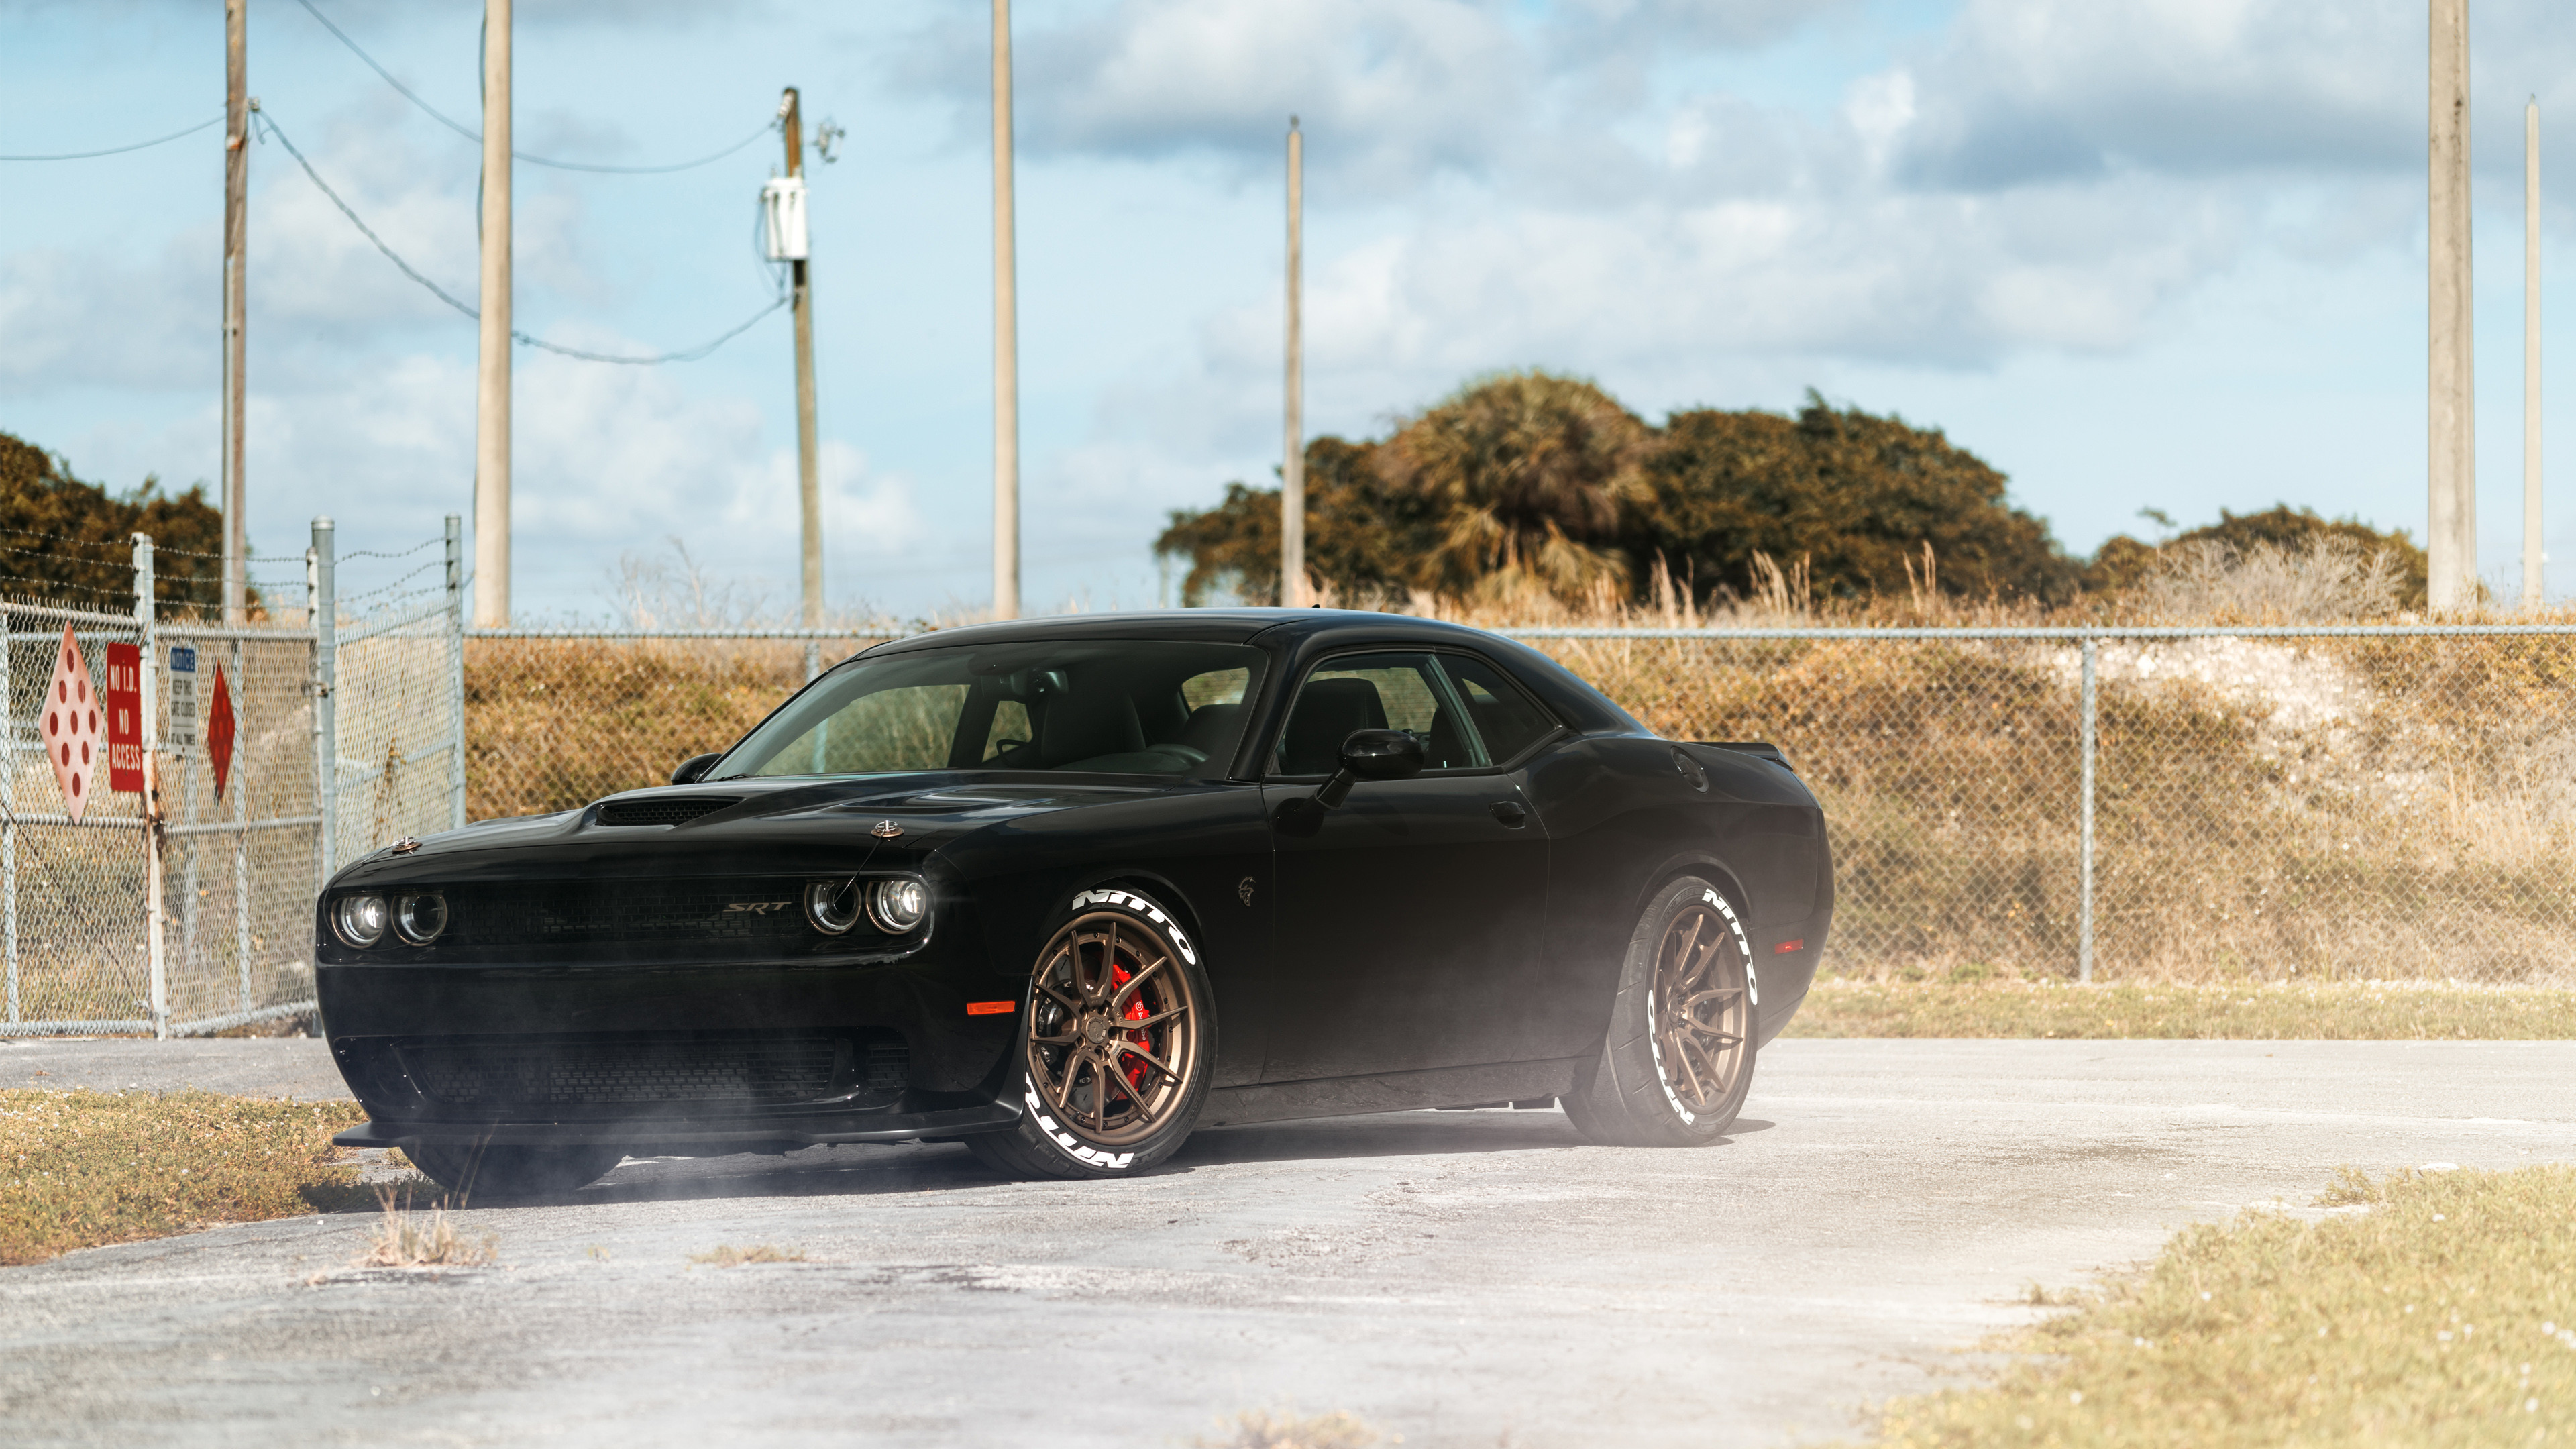 3840x2160 1536x2048 amazing dodge charger hellcat iphone wallpaper with dodge charger  hellcat iphone wallpaper